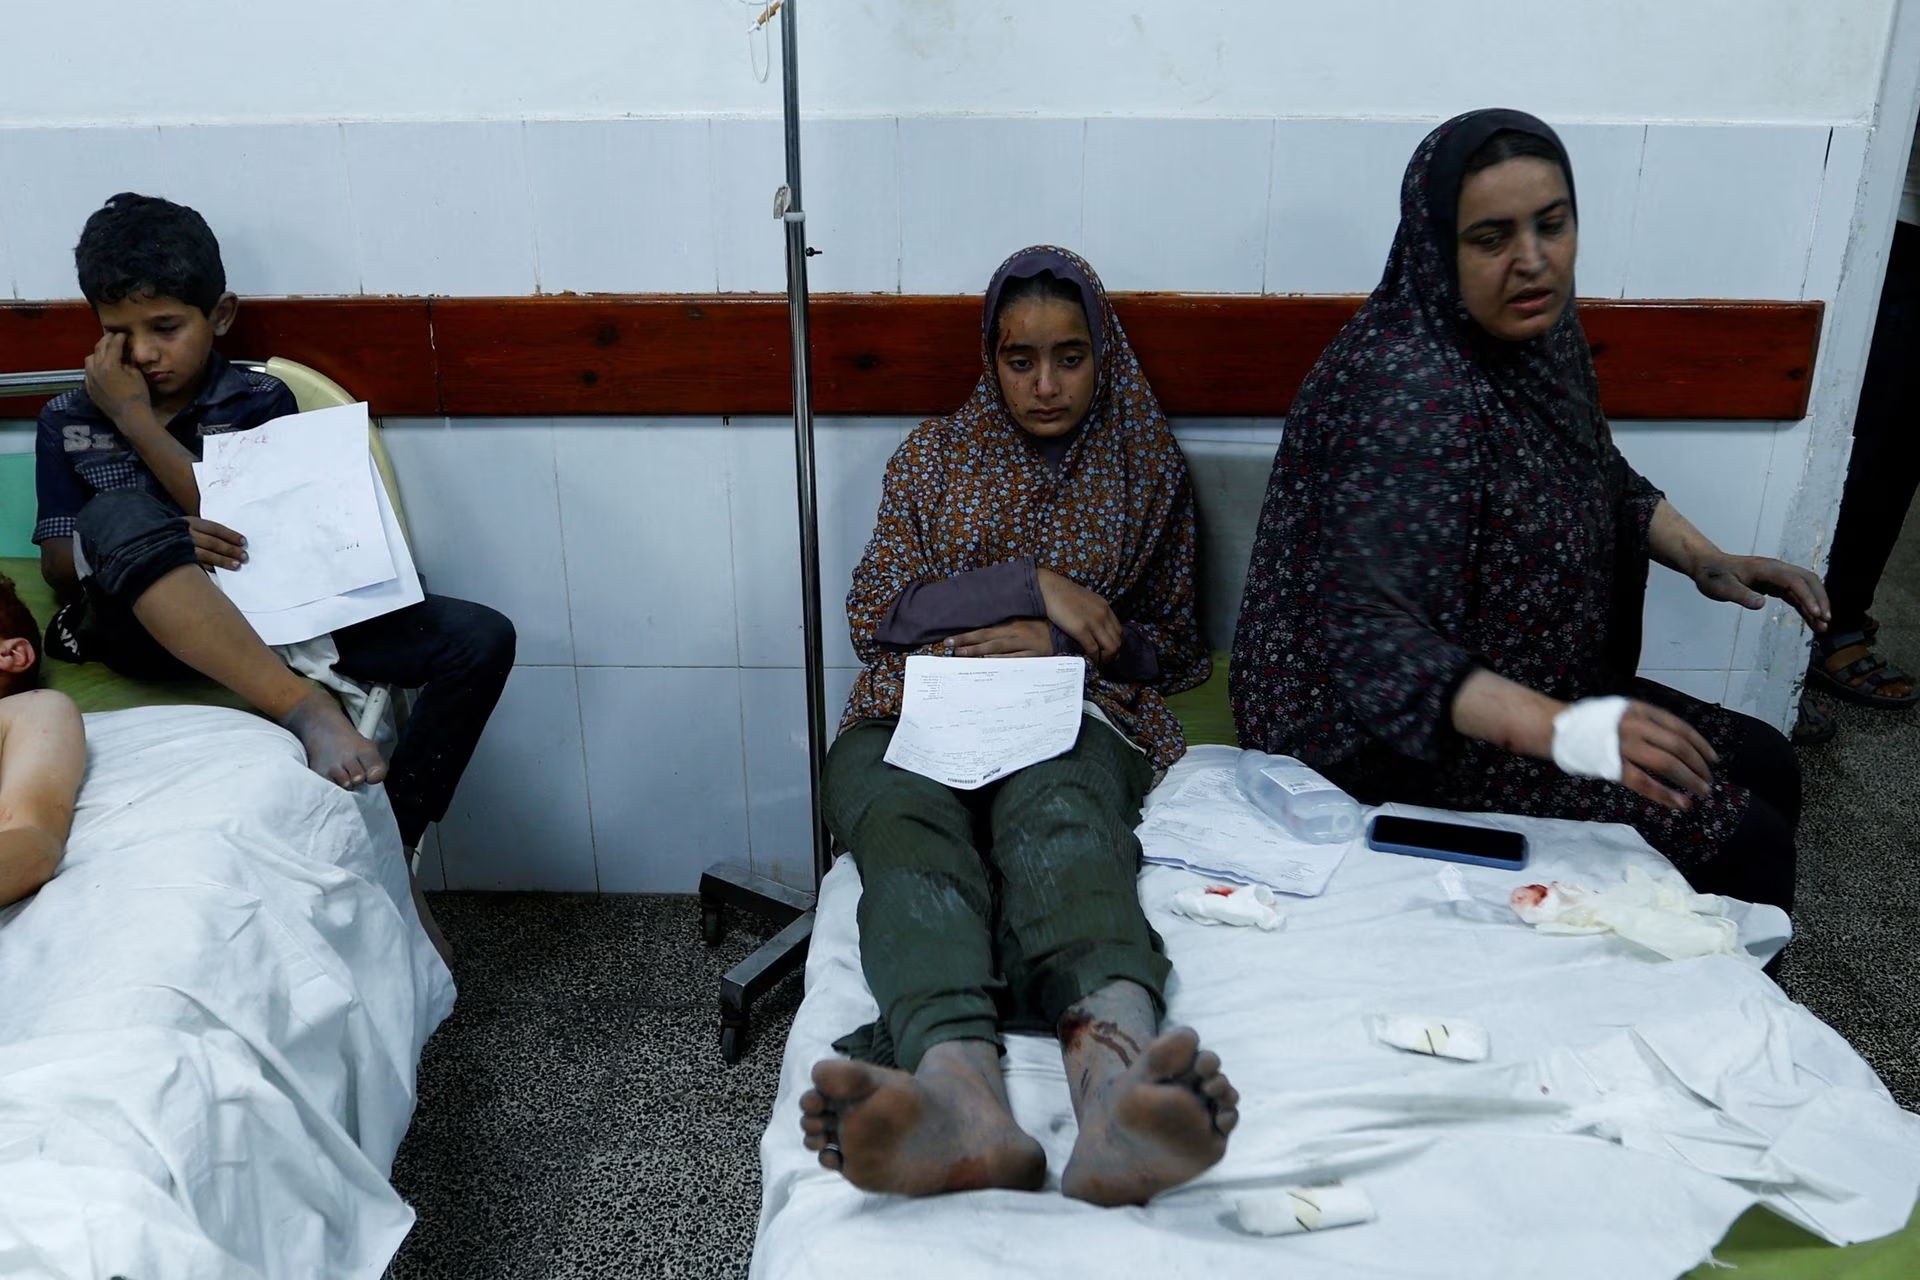 Palestinian women and a boy, wounded in Israeli strikes, lie at a hospital in the southern Gaza strip, October 17.